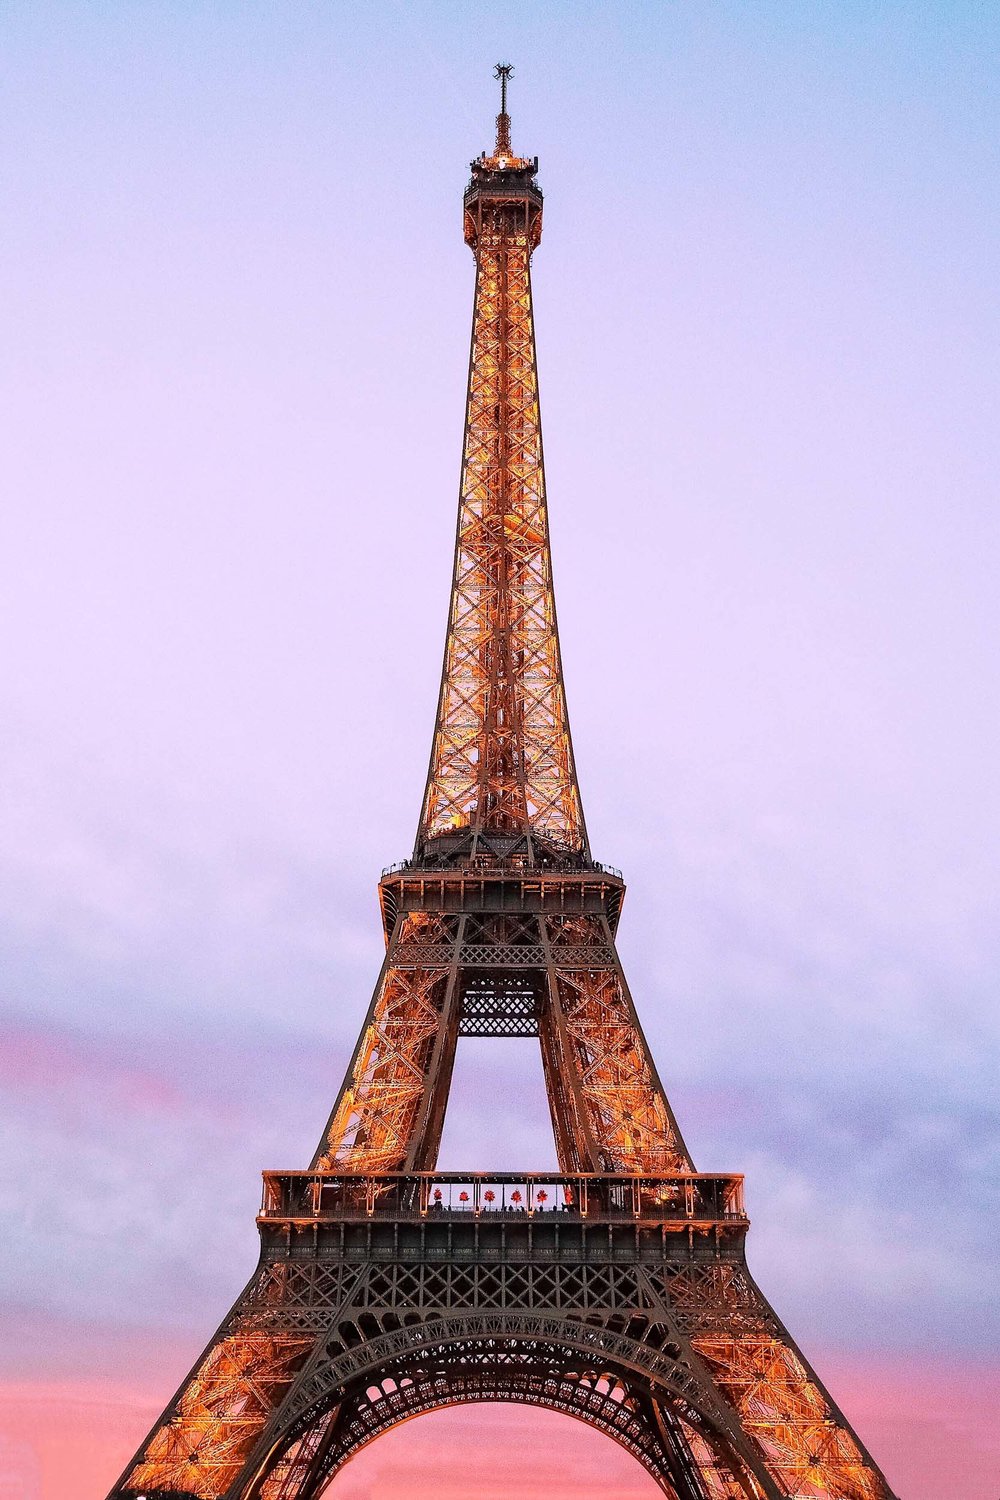 2 days in Paris, 3 days in Paris, 4 days in Paris, or any amount of days in Paris - all Paris itineraries must include a visit to the Eiffel Tower at night